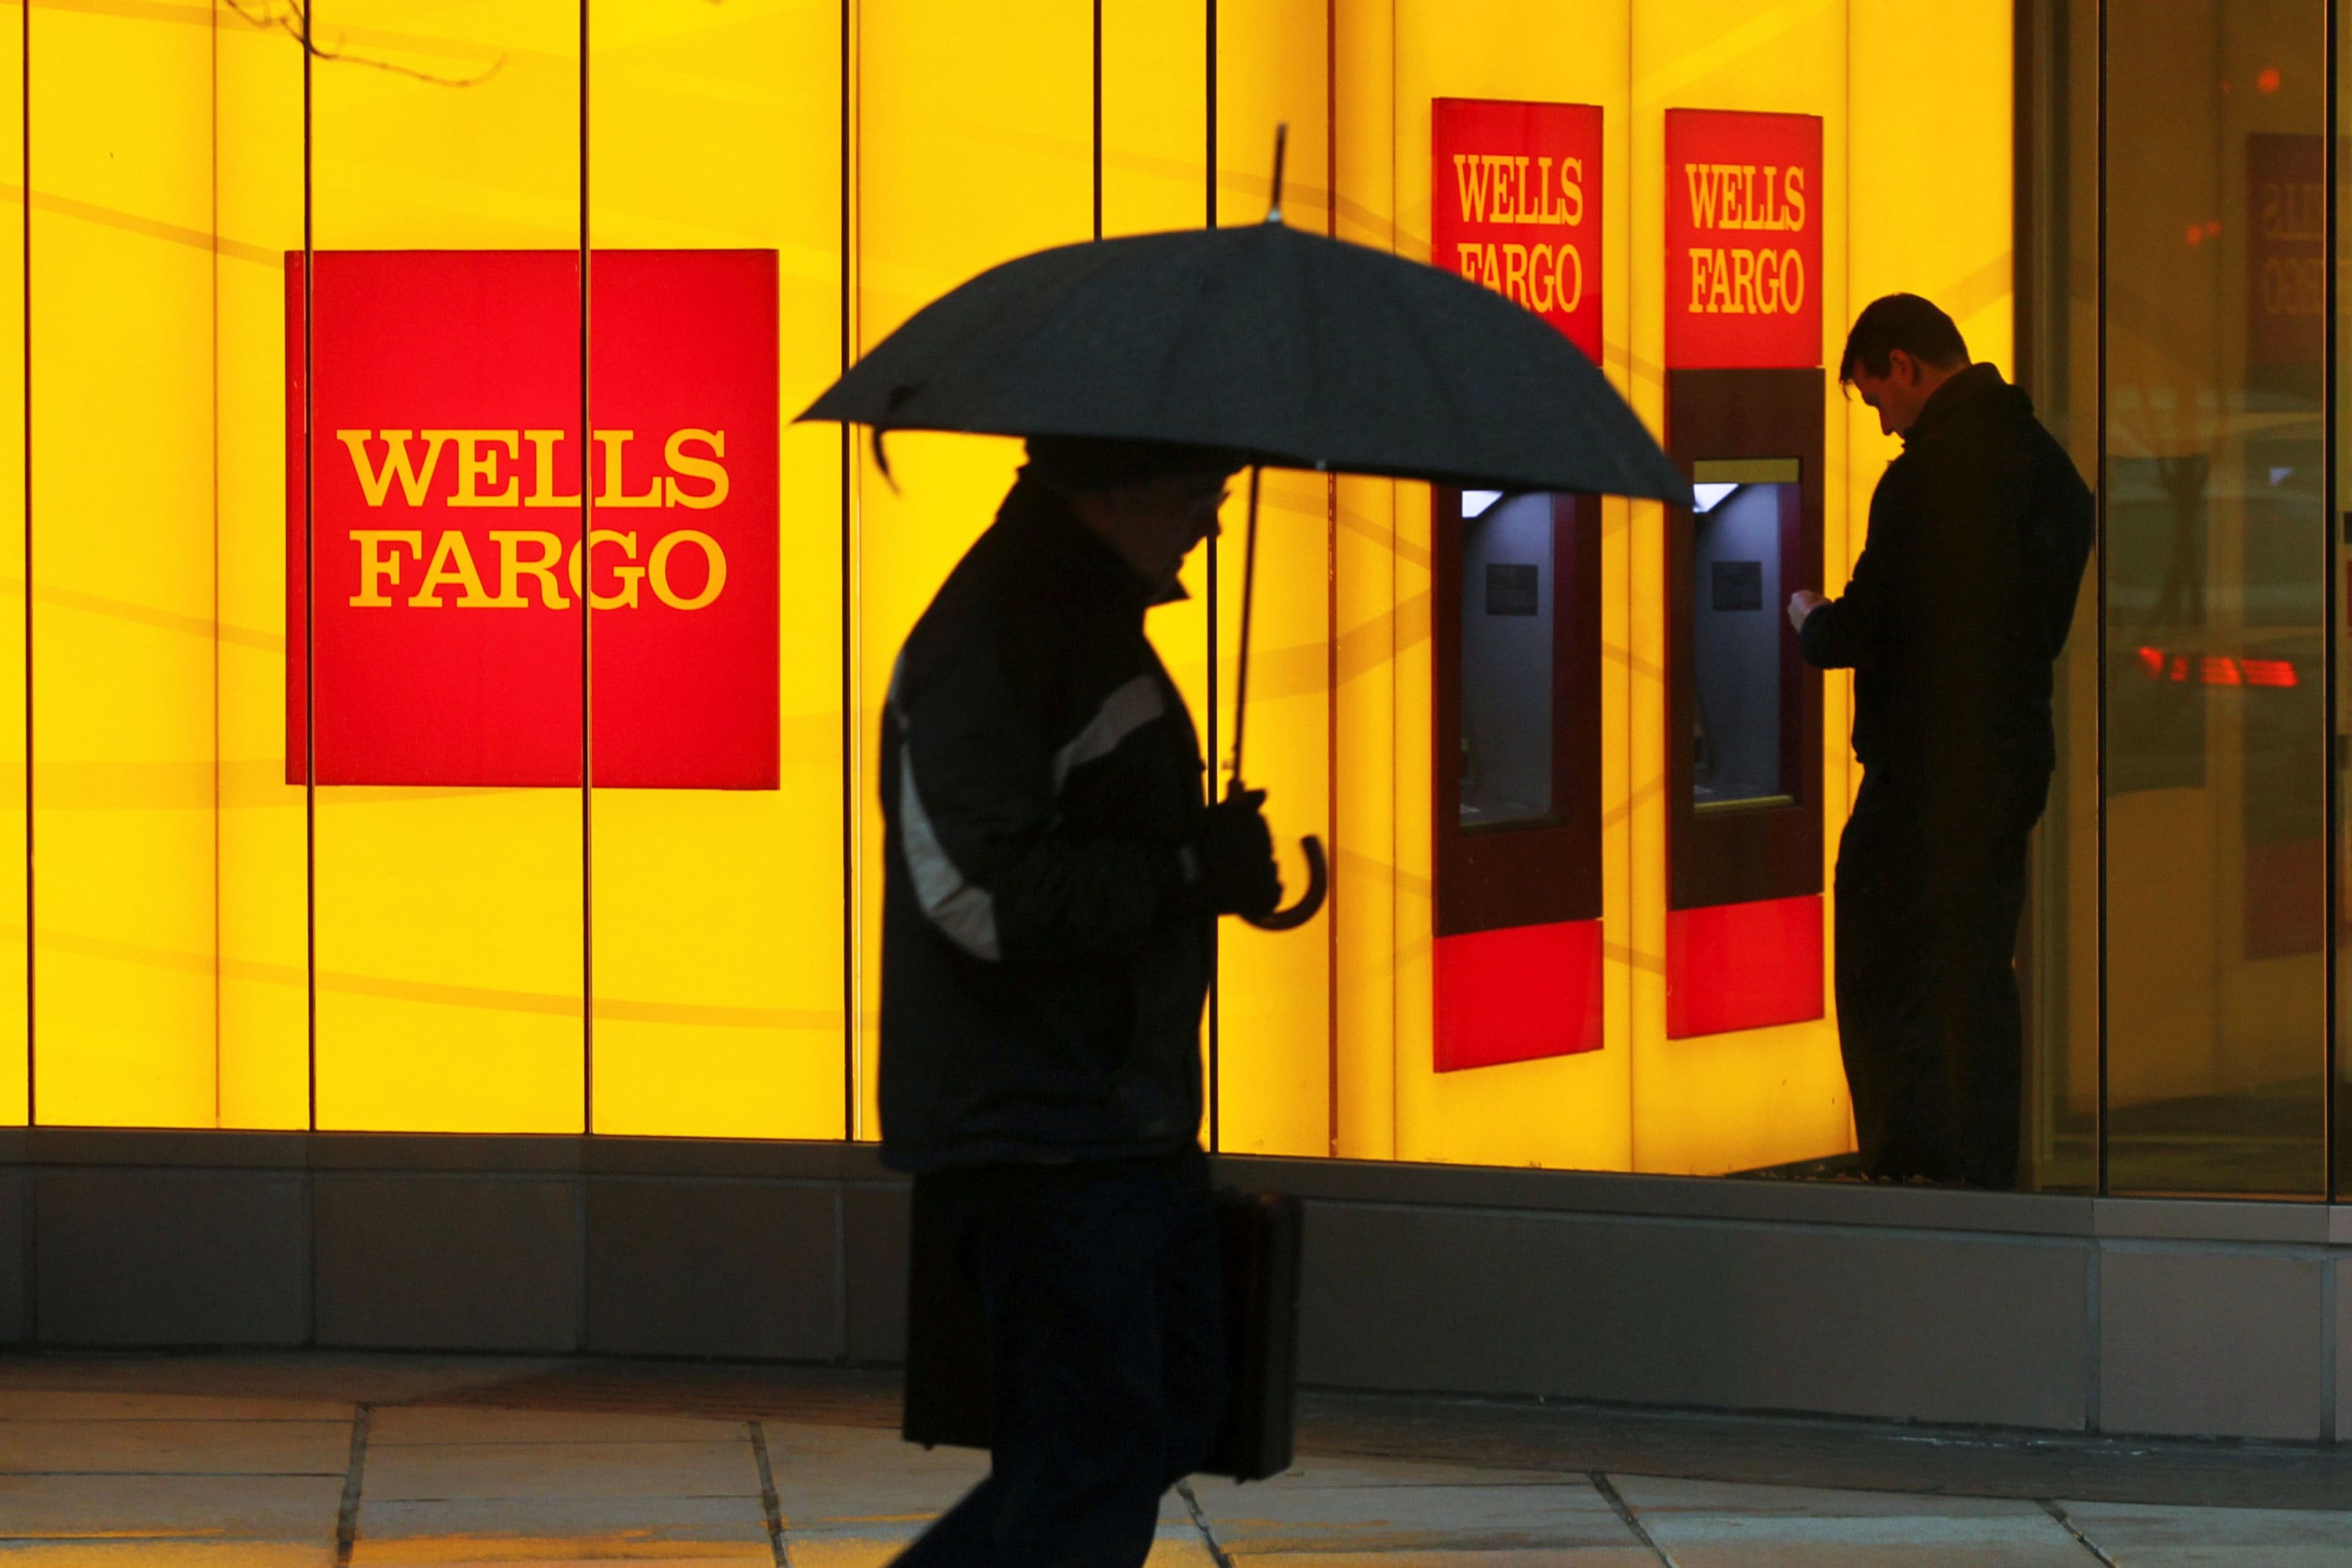 Wells Fargo (WFC) earnings in the fourth quarter of 2020 exceeded estimates, but revenues are short